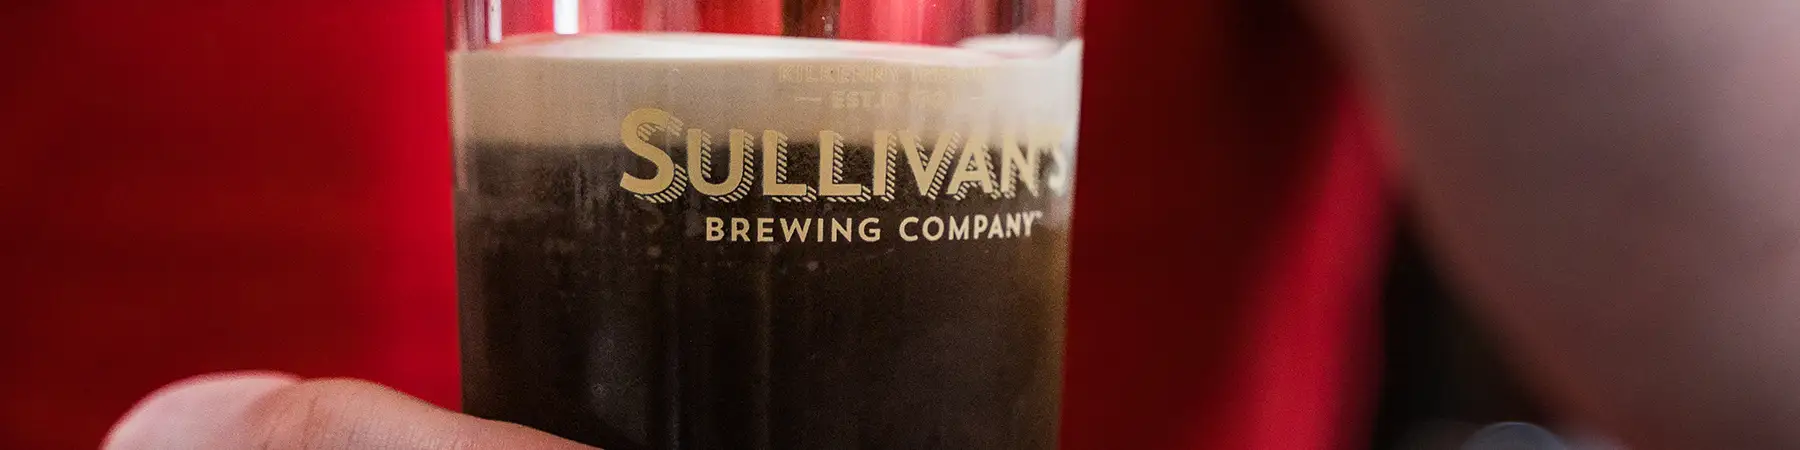 sullivans brewery beer being poured from tap